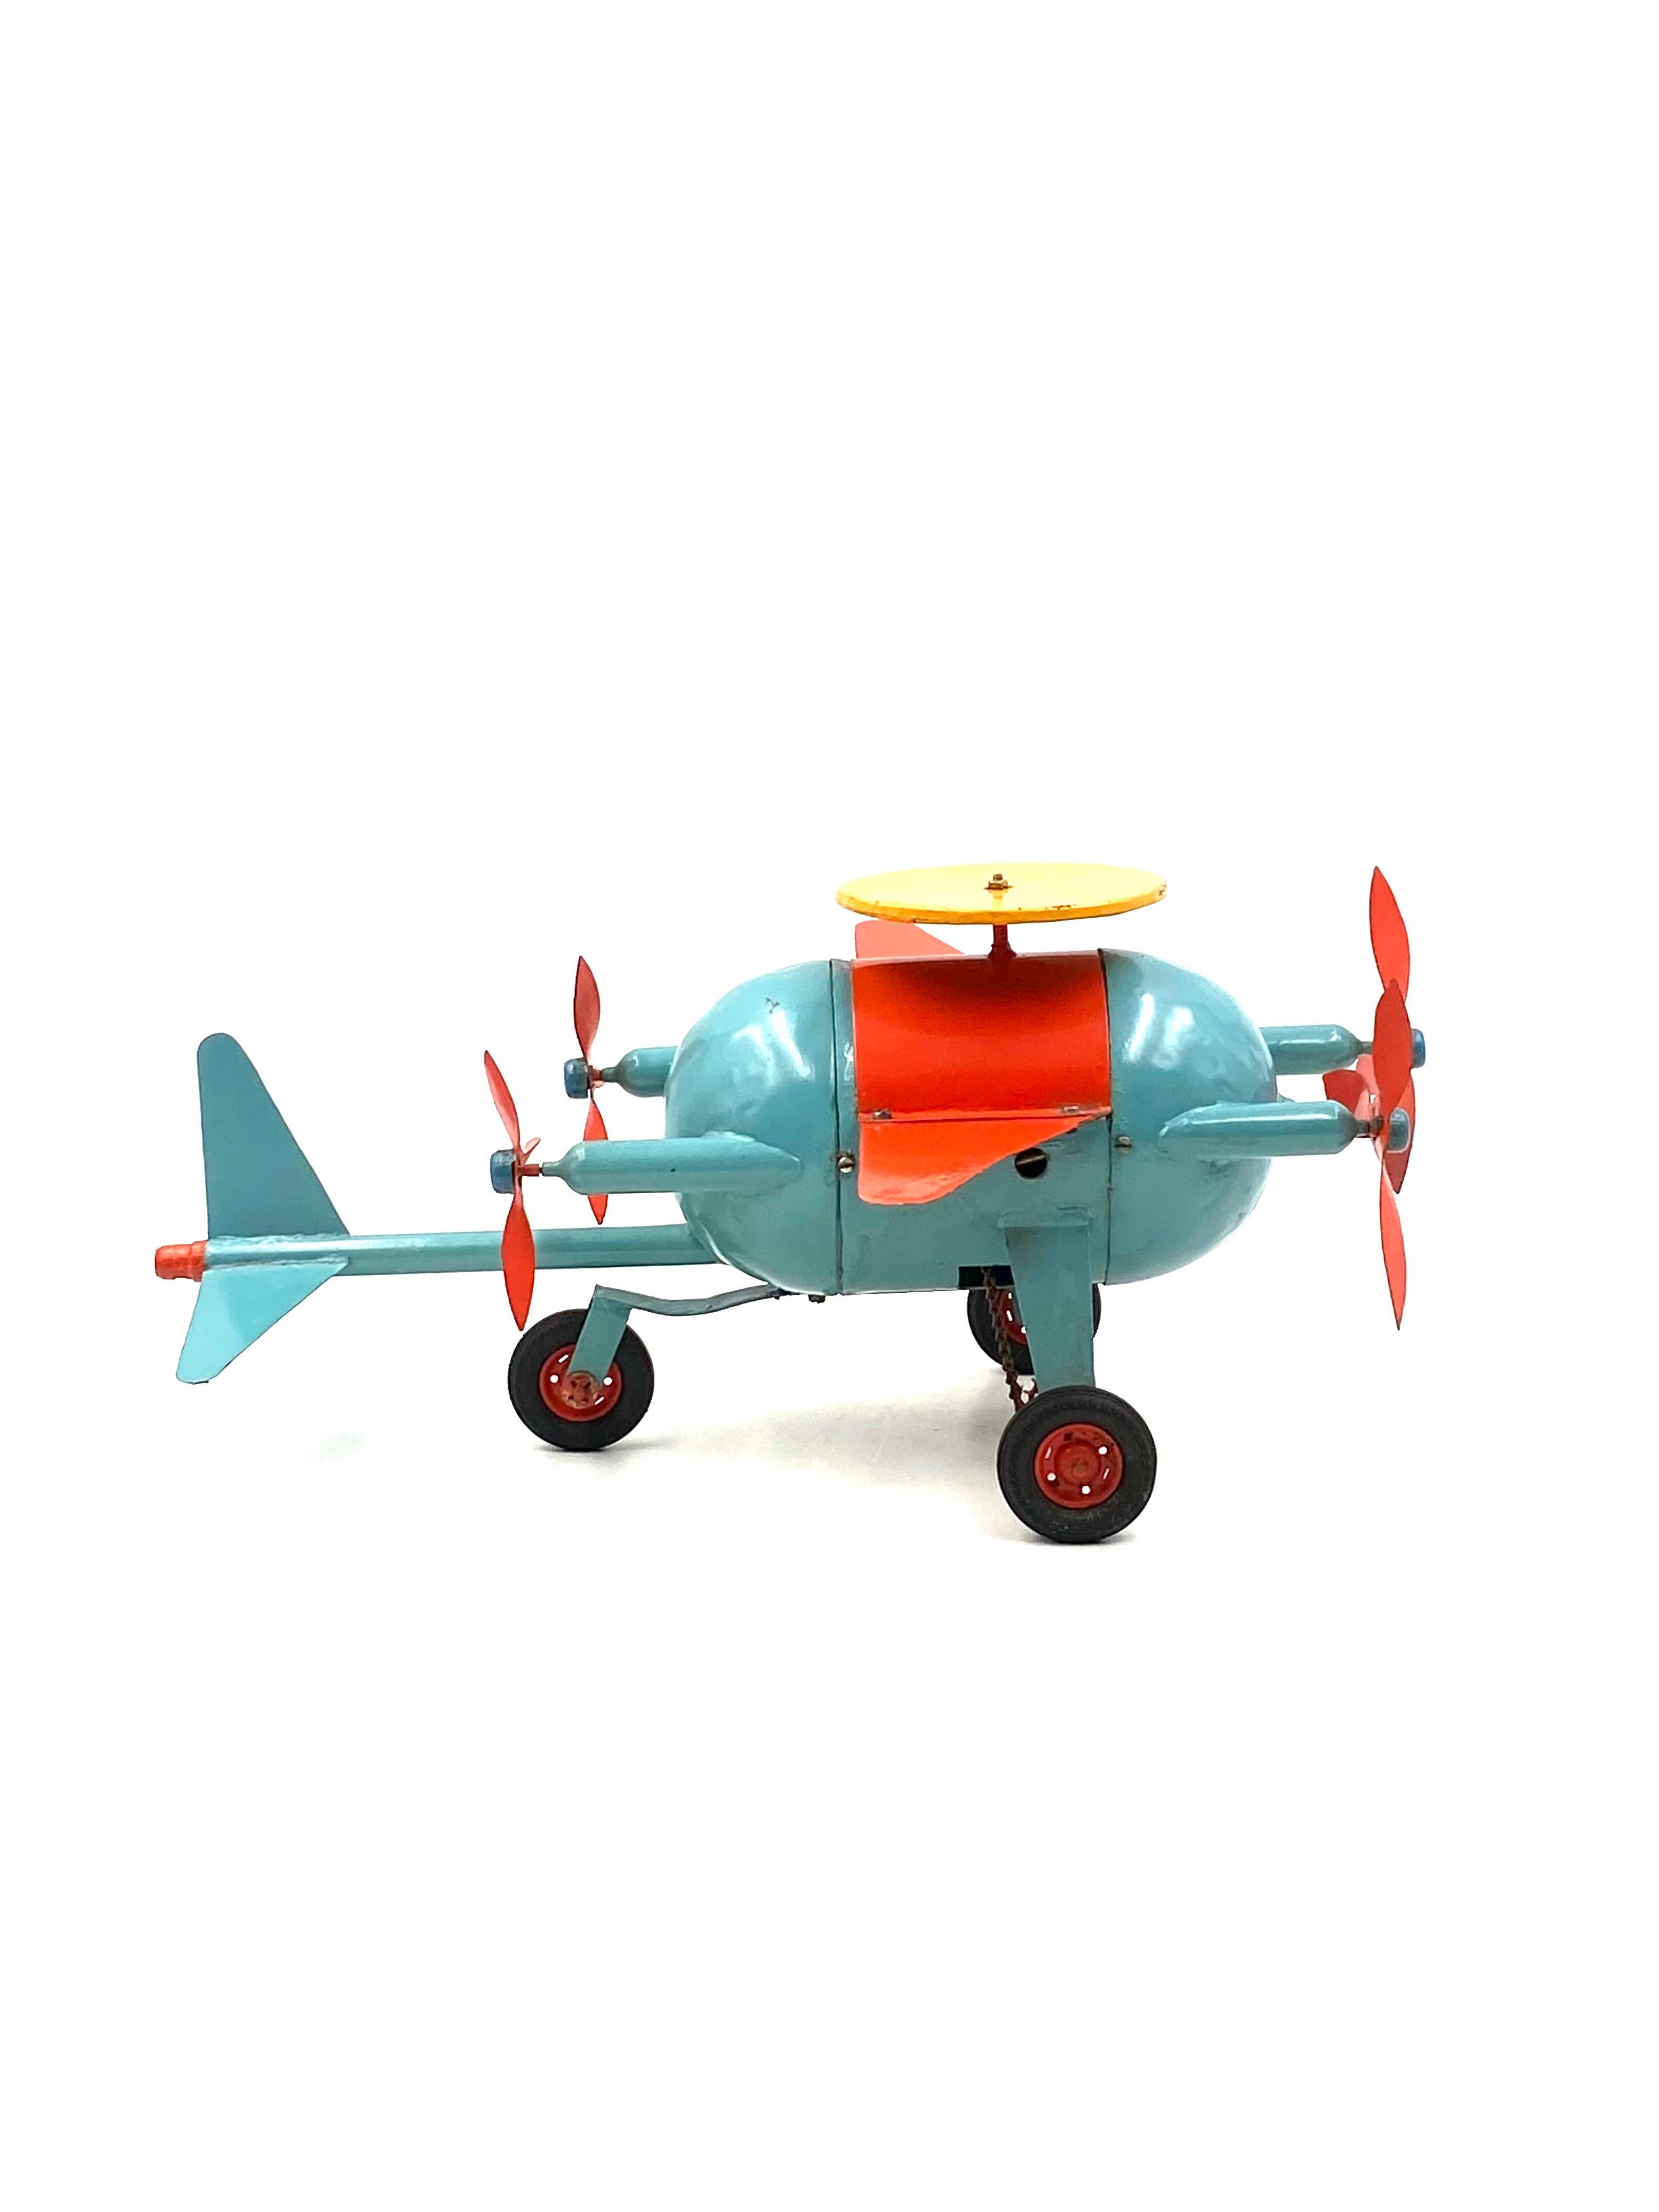 Red and blue airplane toy, France early 20th century For Sale 7